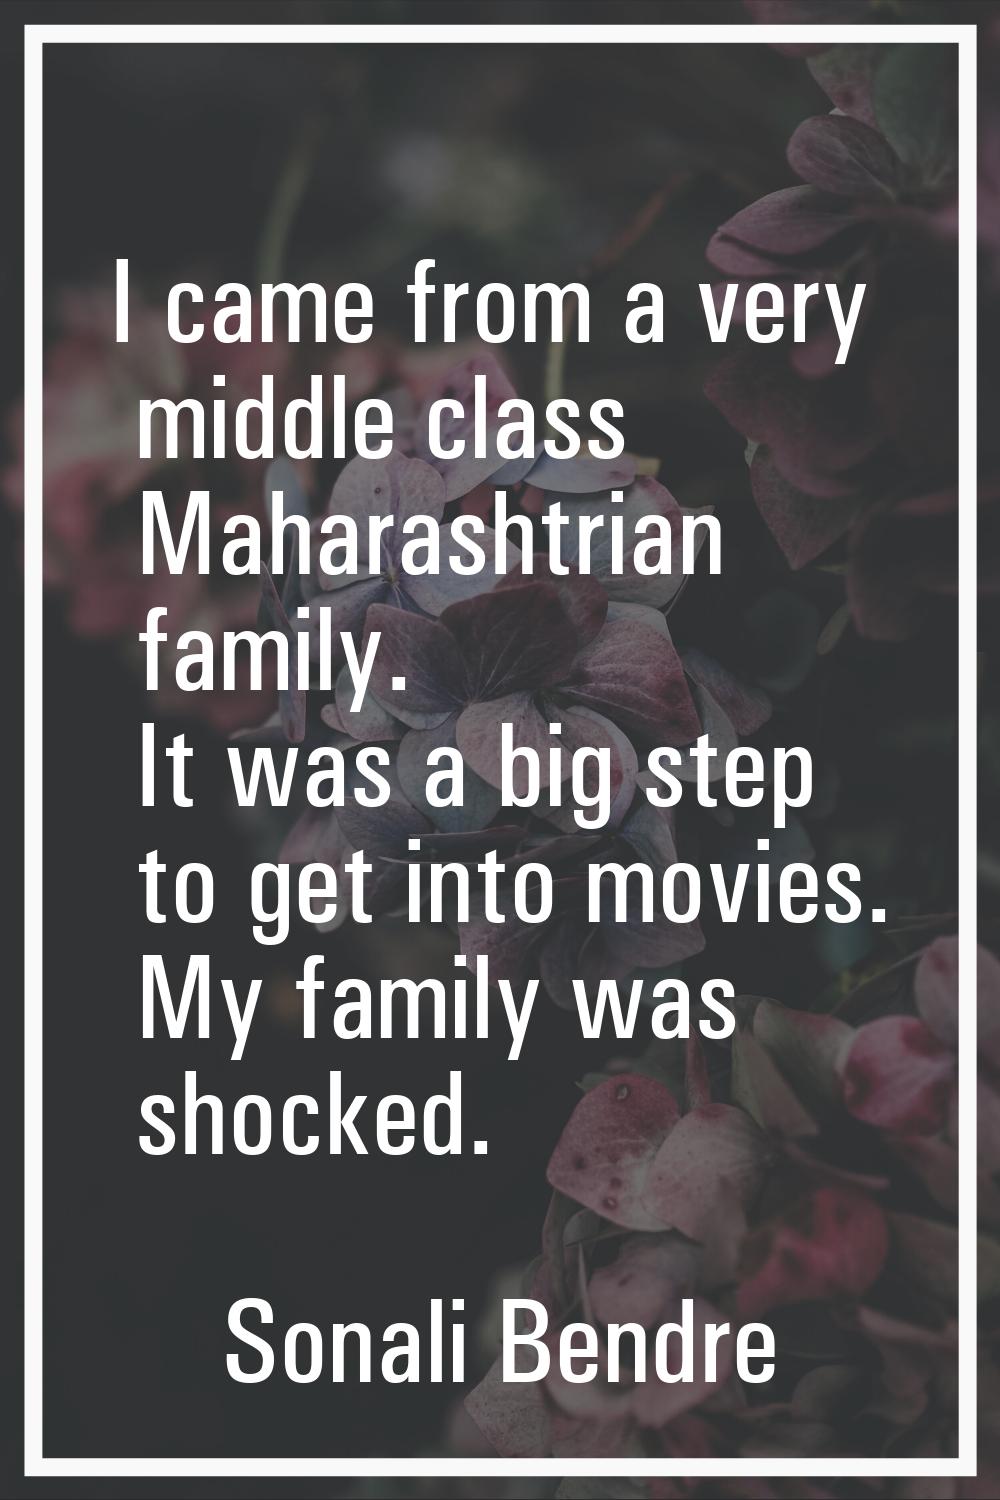 I came from a very middle class Maharashtrian family. It was a big step to get into movies. My fami